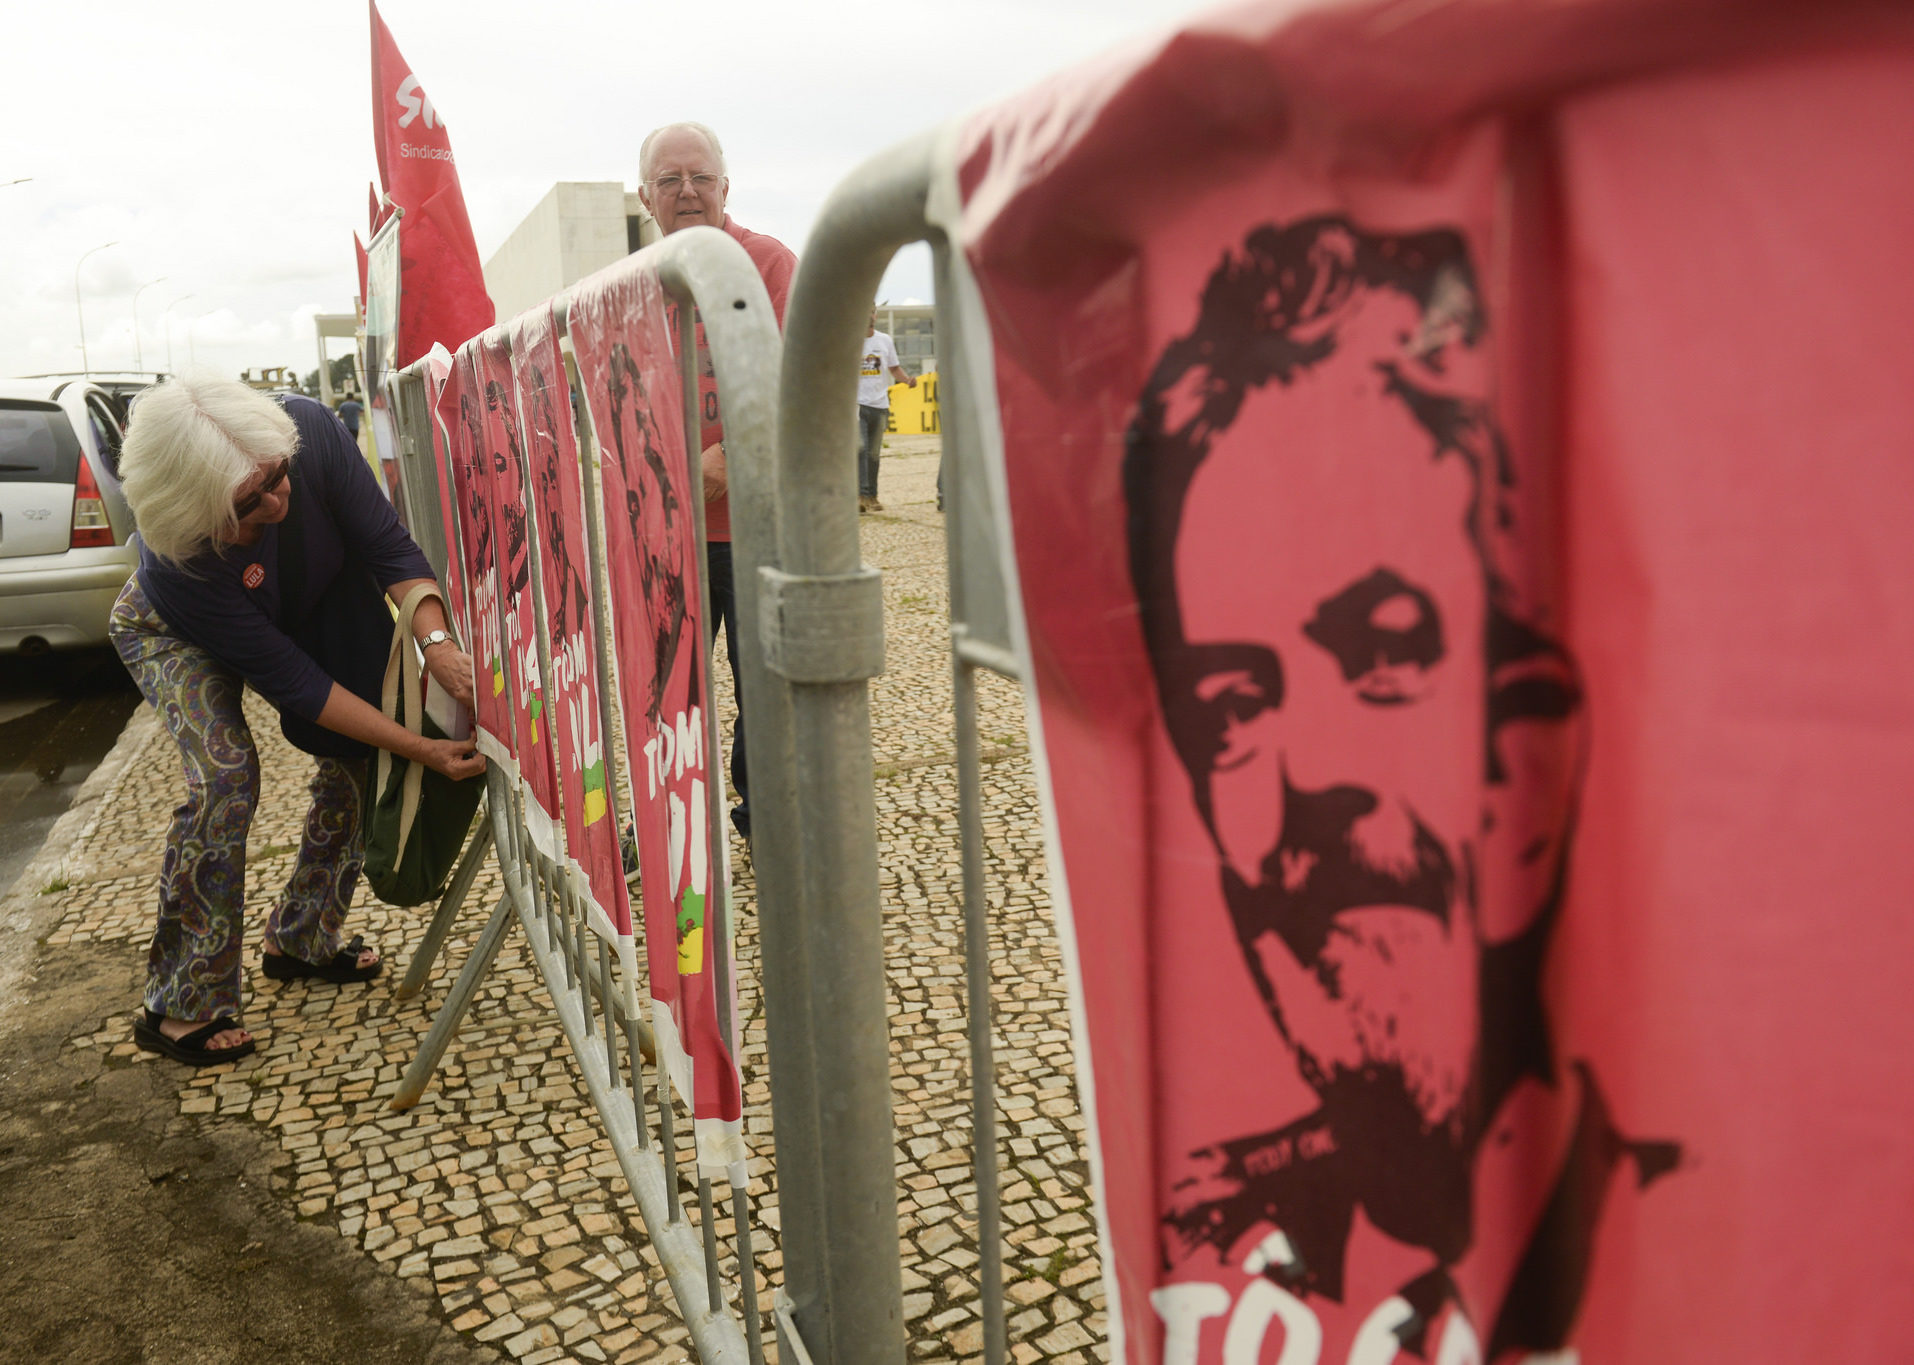 Supporters of former Brazilian president Luiz Inácio Lula da Silva put up banners outside the Supreme Federal Court in March